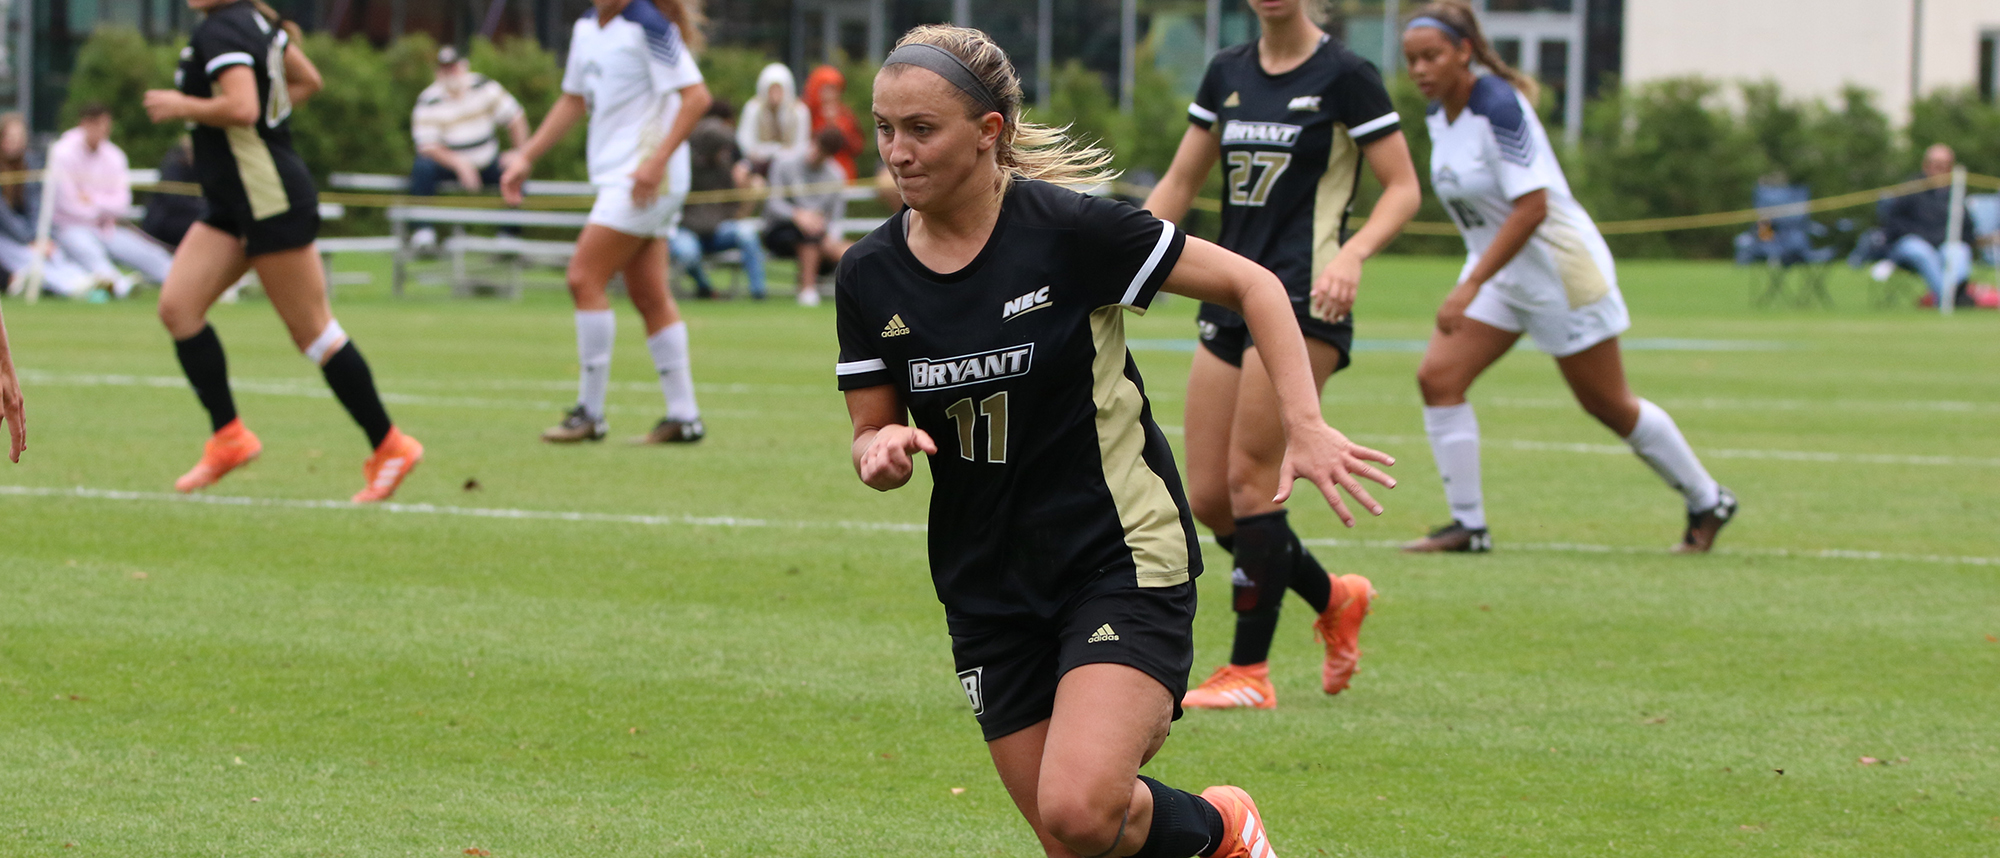 Manna's goal lifts Bryant past Wagner, 1-0